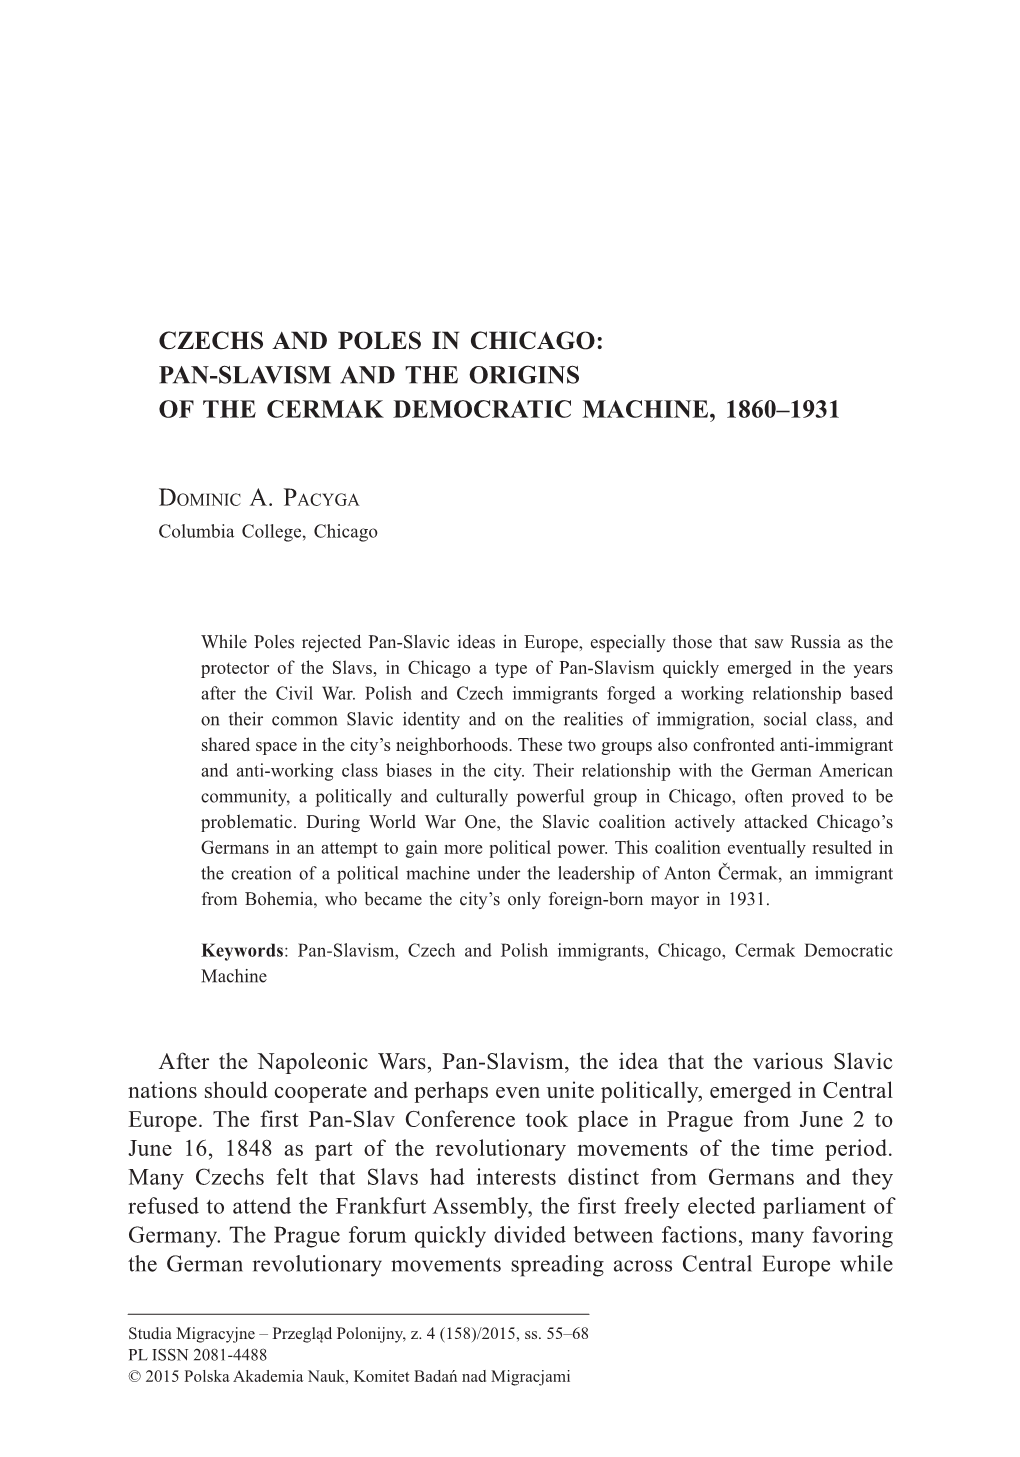 Czechs and Poles in Chicago: Pan-Slavism and the Origins of the Cermak Democratic Machine, 1860–1931